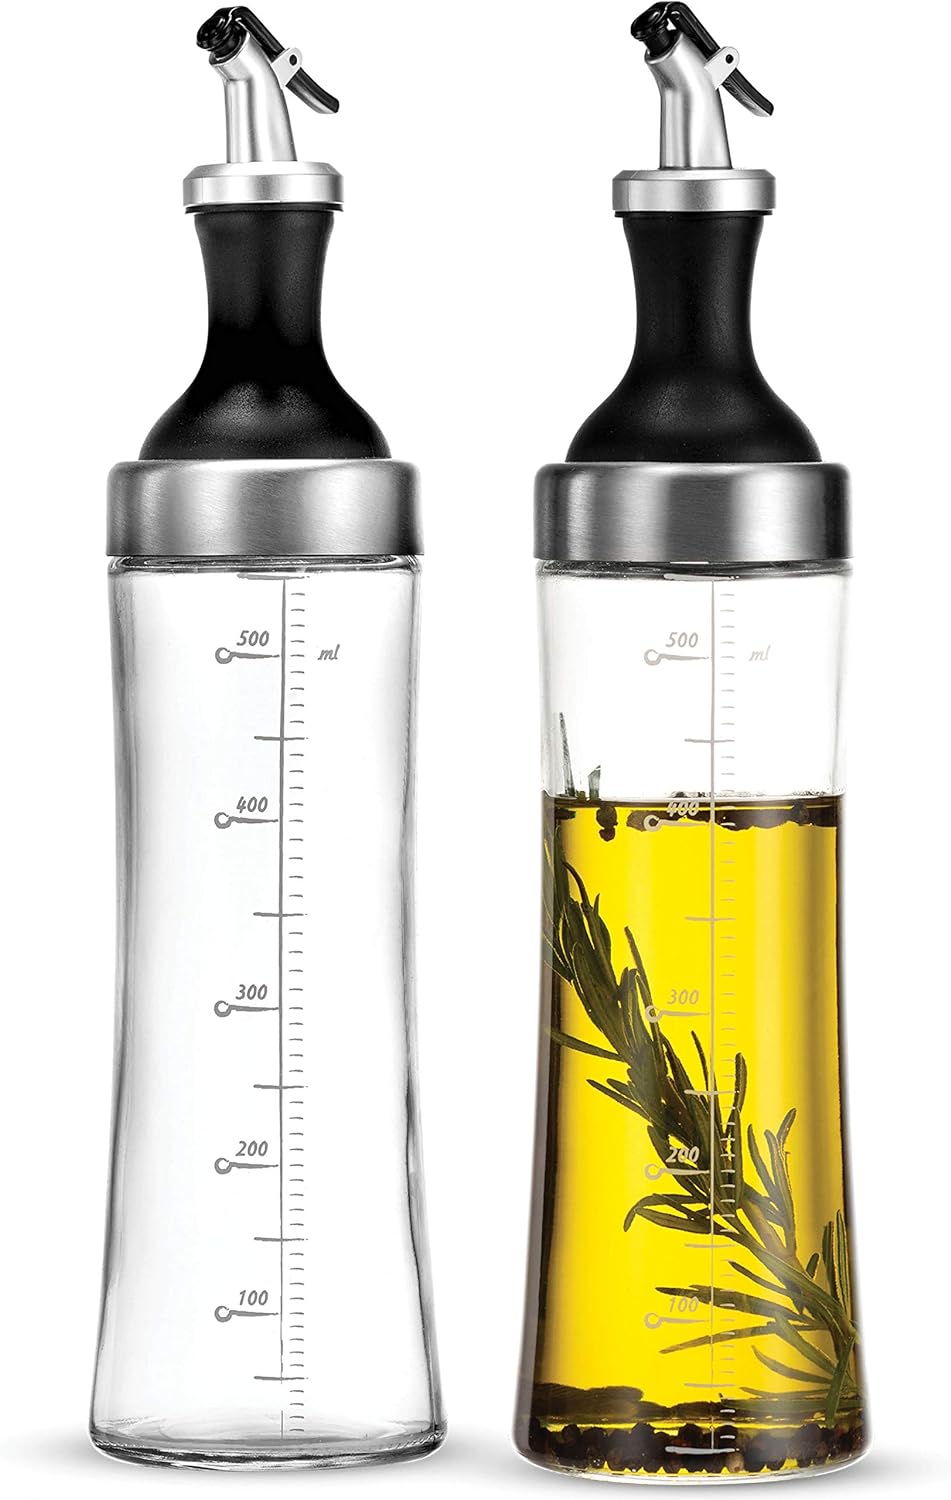 FineDine Superior Glass Oil and Vinegar Dispenser, Modern Olive Oil Dispenser, Wide Opening for Easy Refill and Cleaning, Clear Glass Oil Bottle, Pouring Spouts, 18 Oz. Cruet Set (Set of 2)